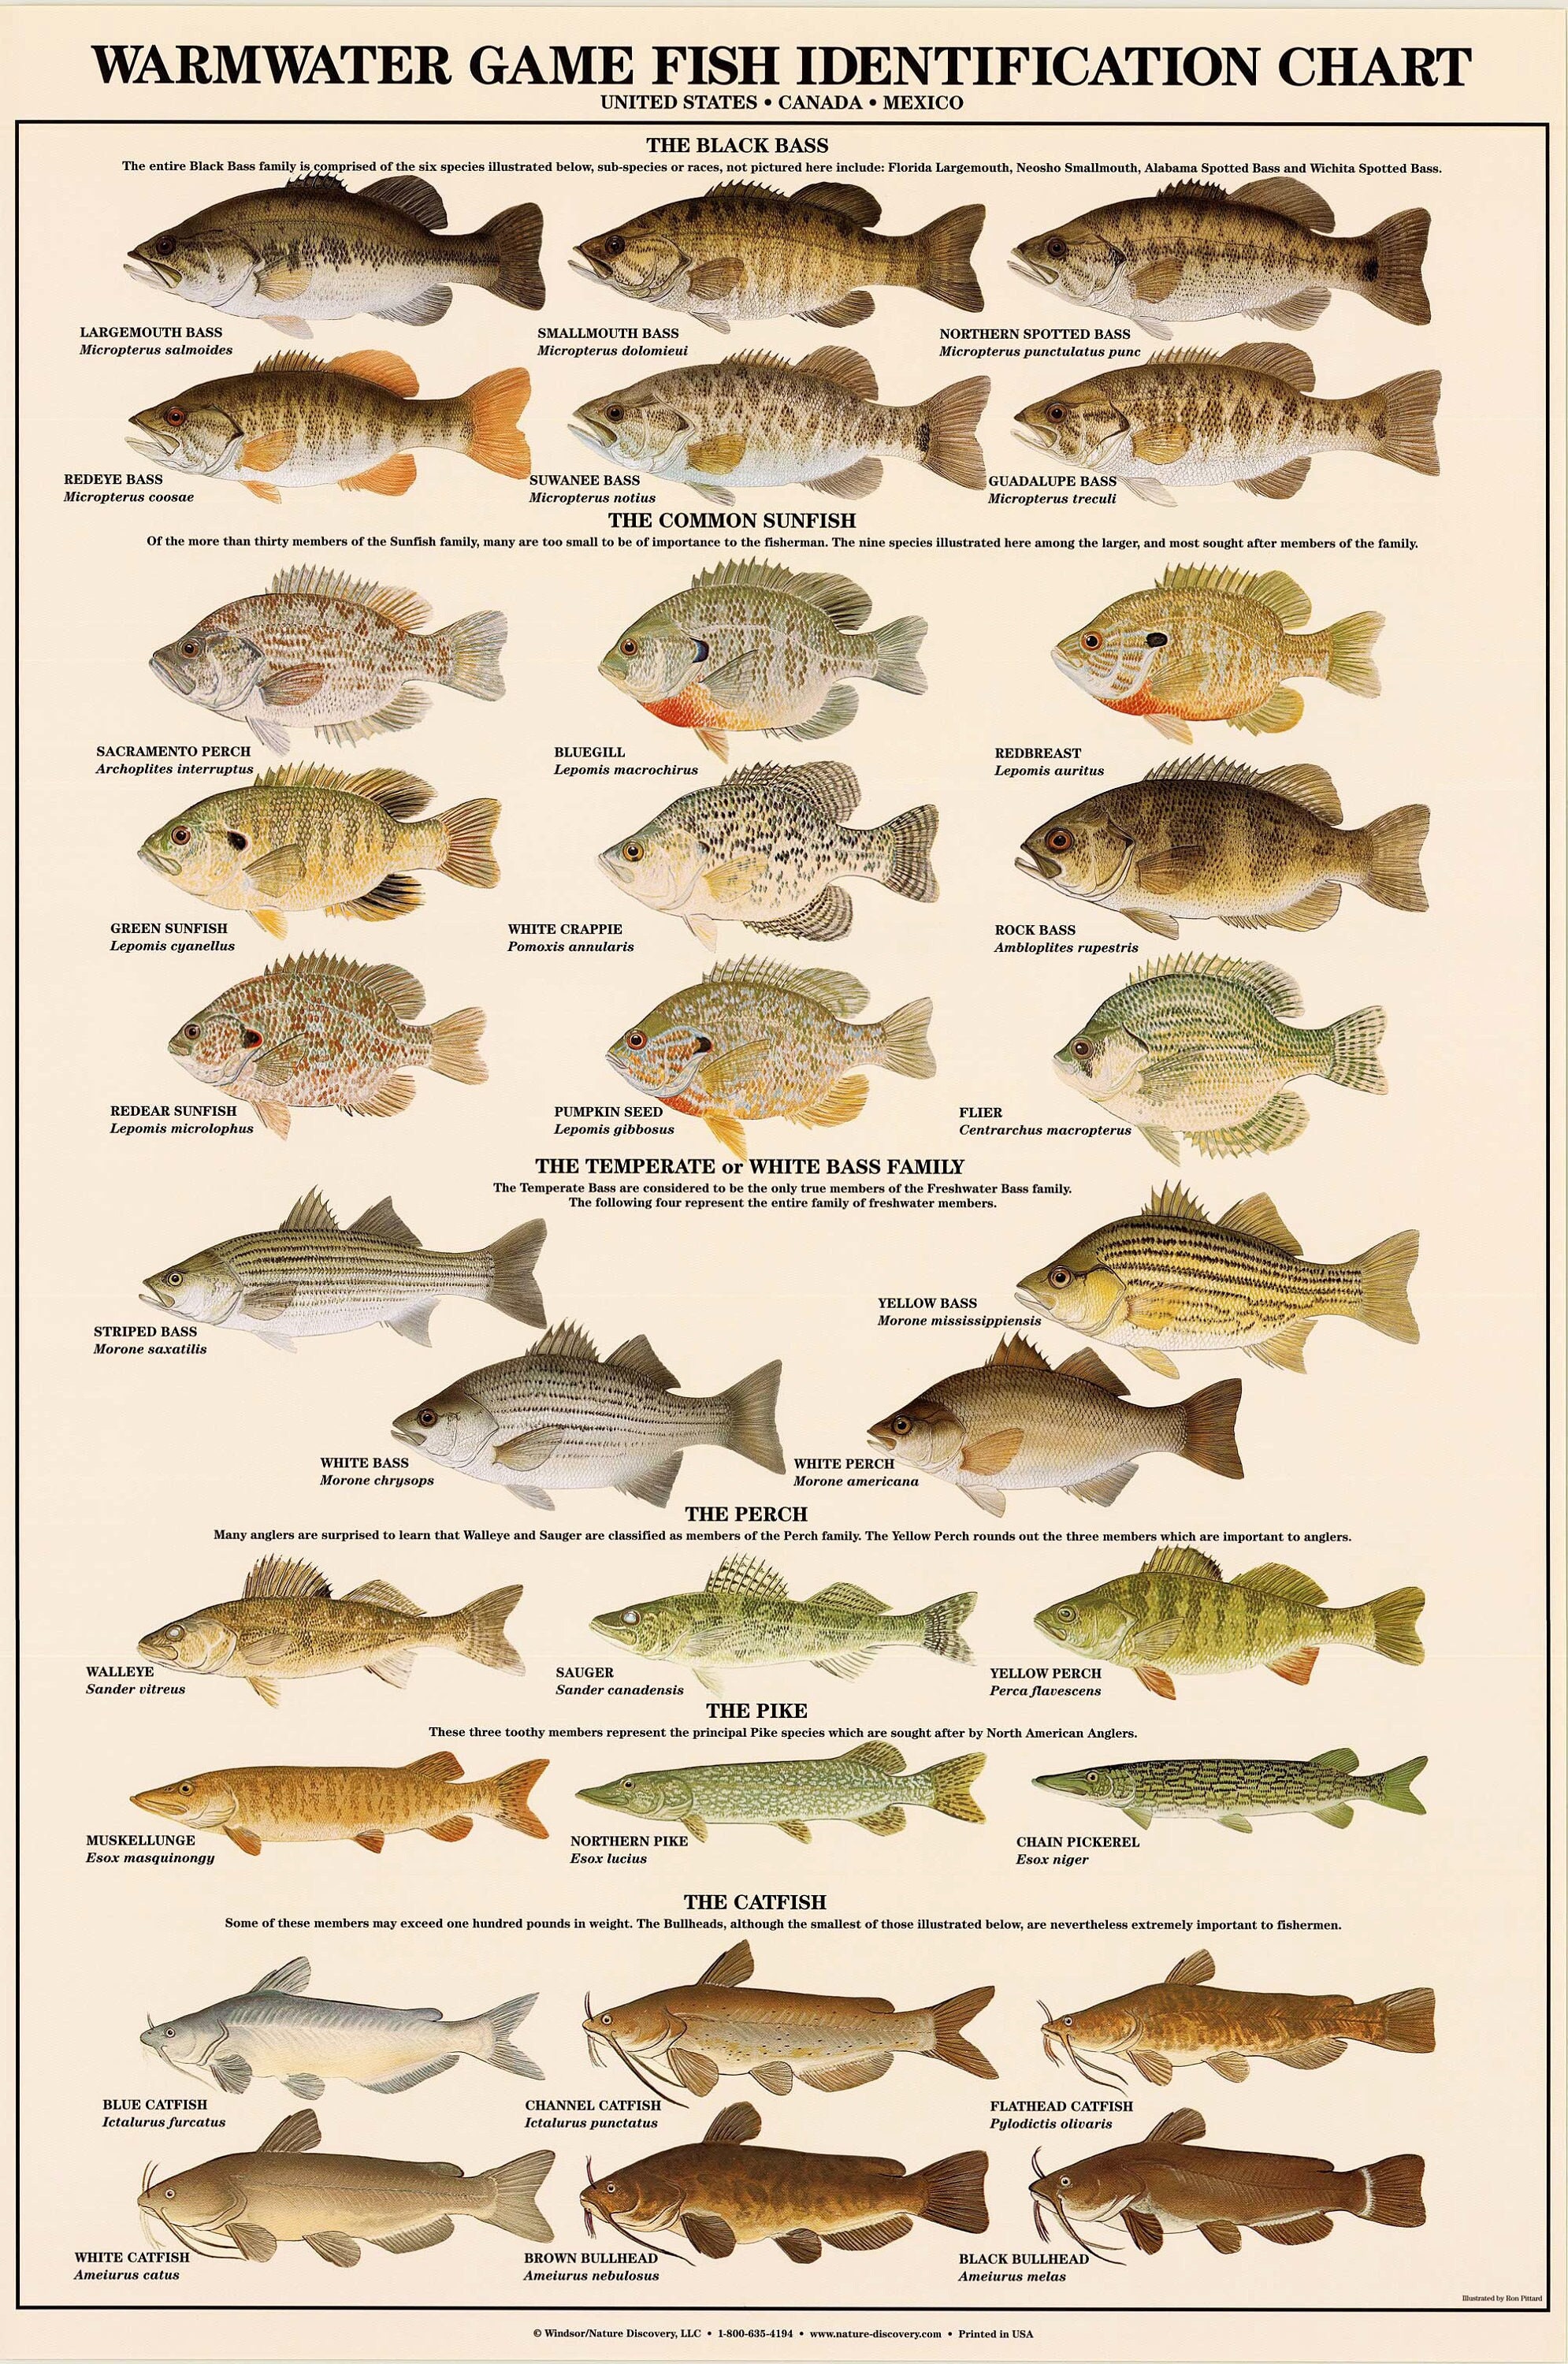 Warmwater Game Fish Poster, Identification Chart and Fishermen